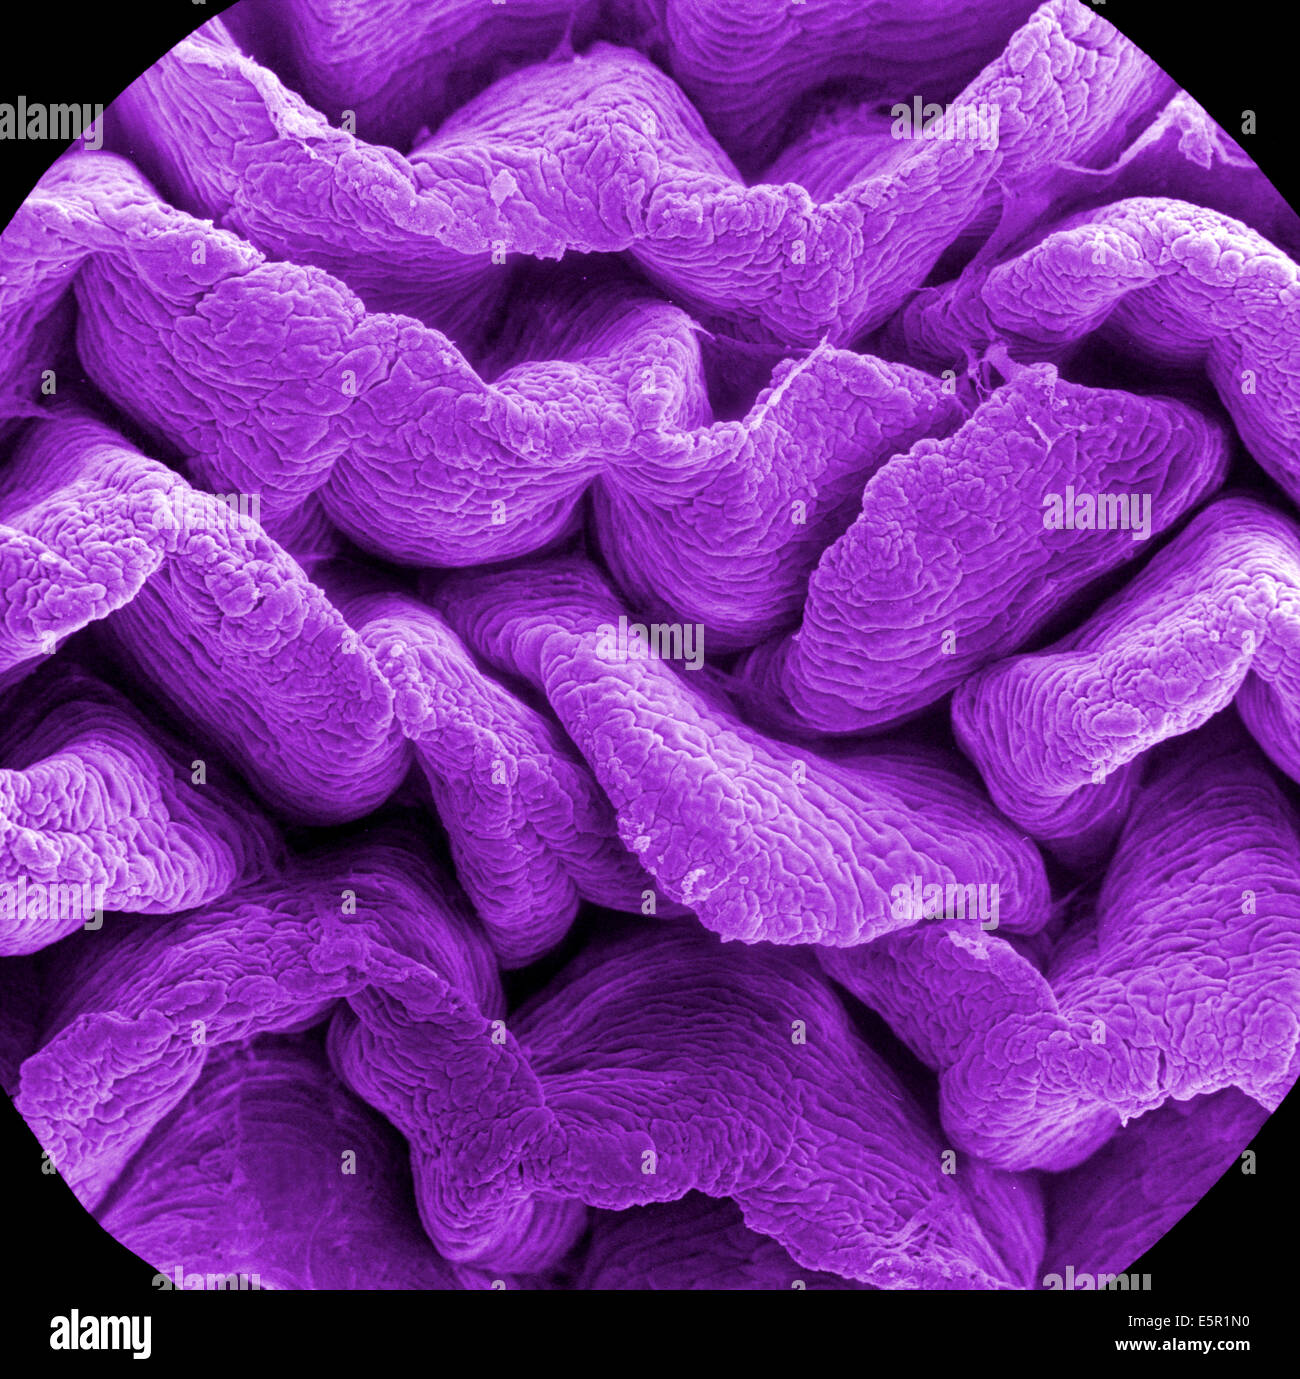 Scanning electron micrograph (SEM) of an absorptive epithelial cells lining the surface of the small intestine, showing Stock Photo